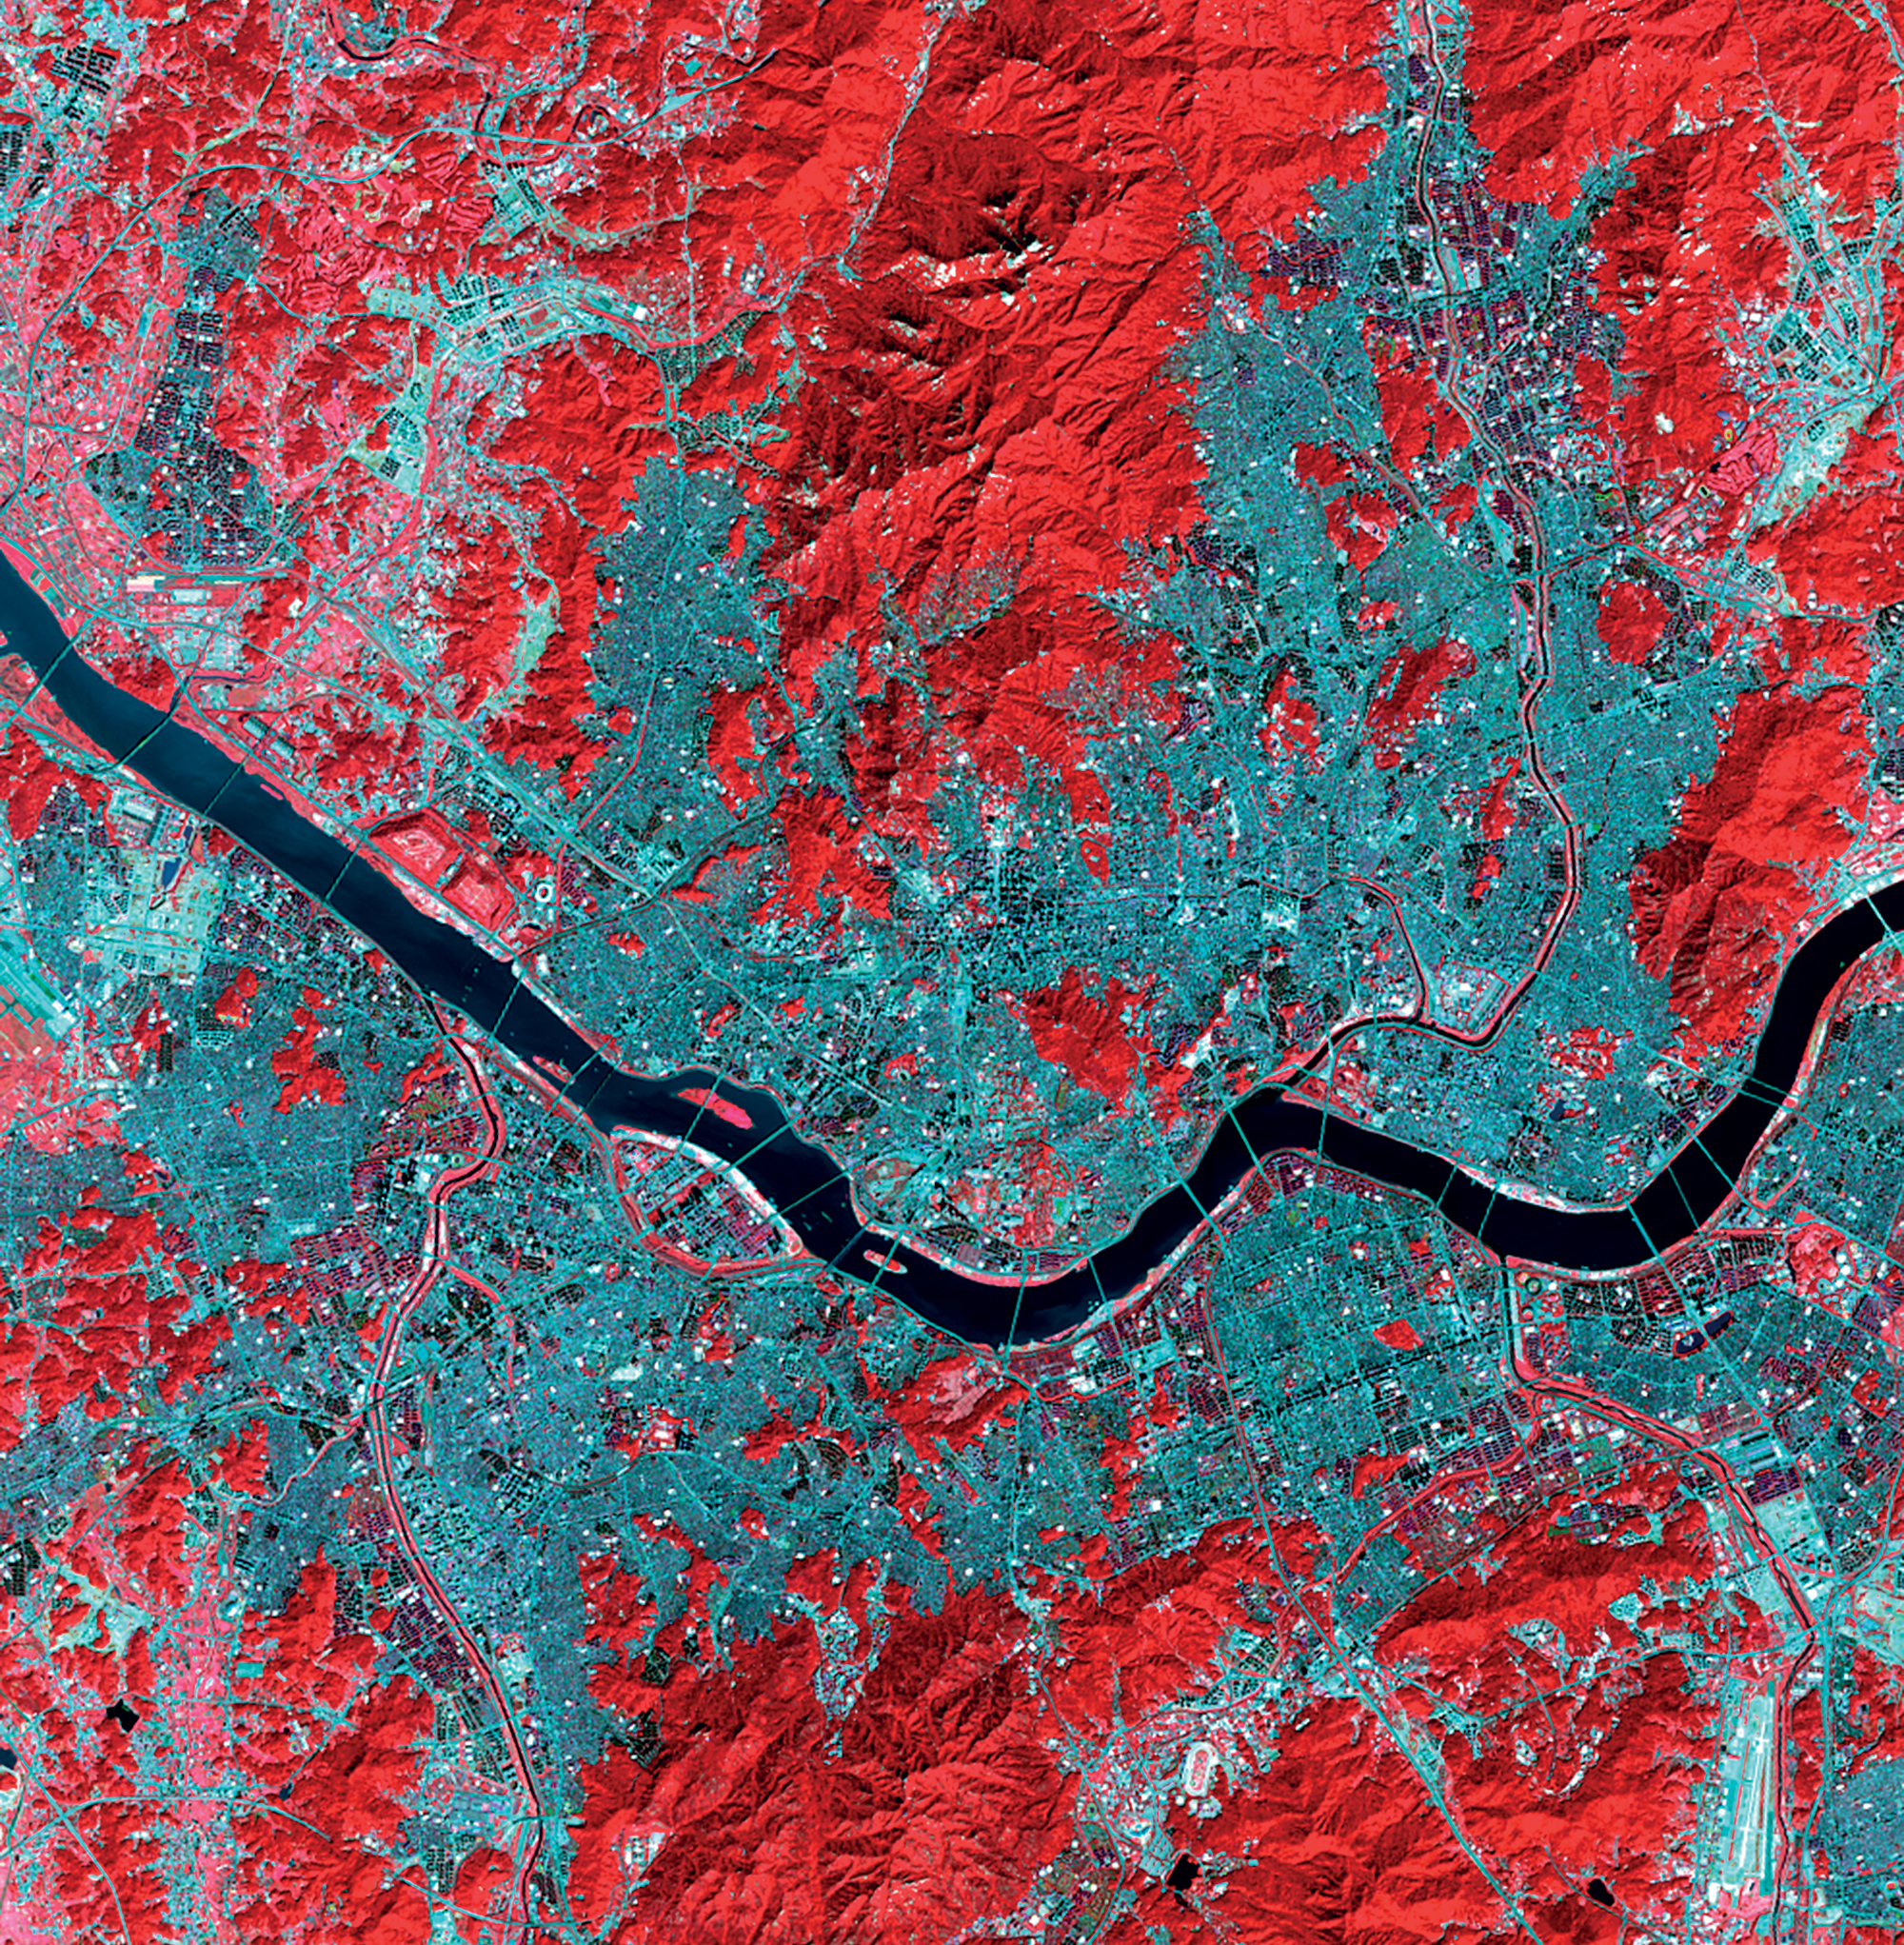 <strong>Seoul, Republic of Korea</strong> <em>1:148,000</em> Twenty-seven bridges span the Han River in the center of Seoul (pictured in dark blue), stitching together the two halves of the city and acting as networks between communities on opposite sides of the river. (Landsat OLI/TIRS)